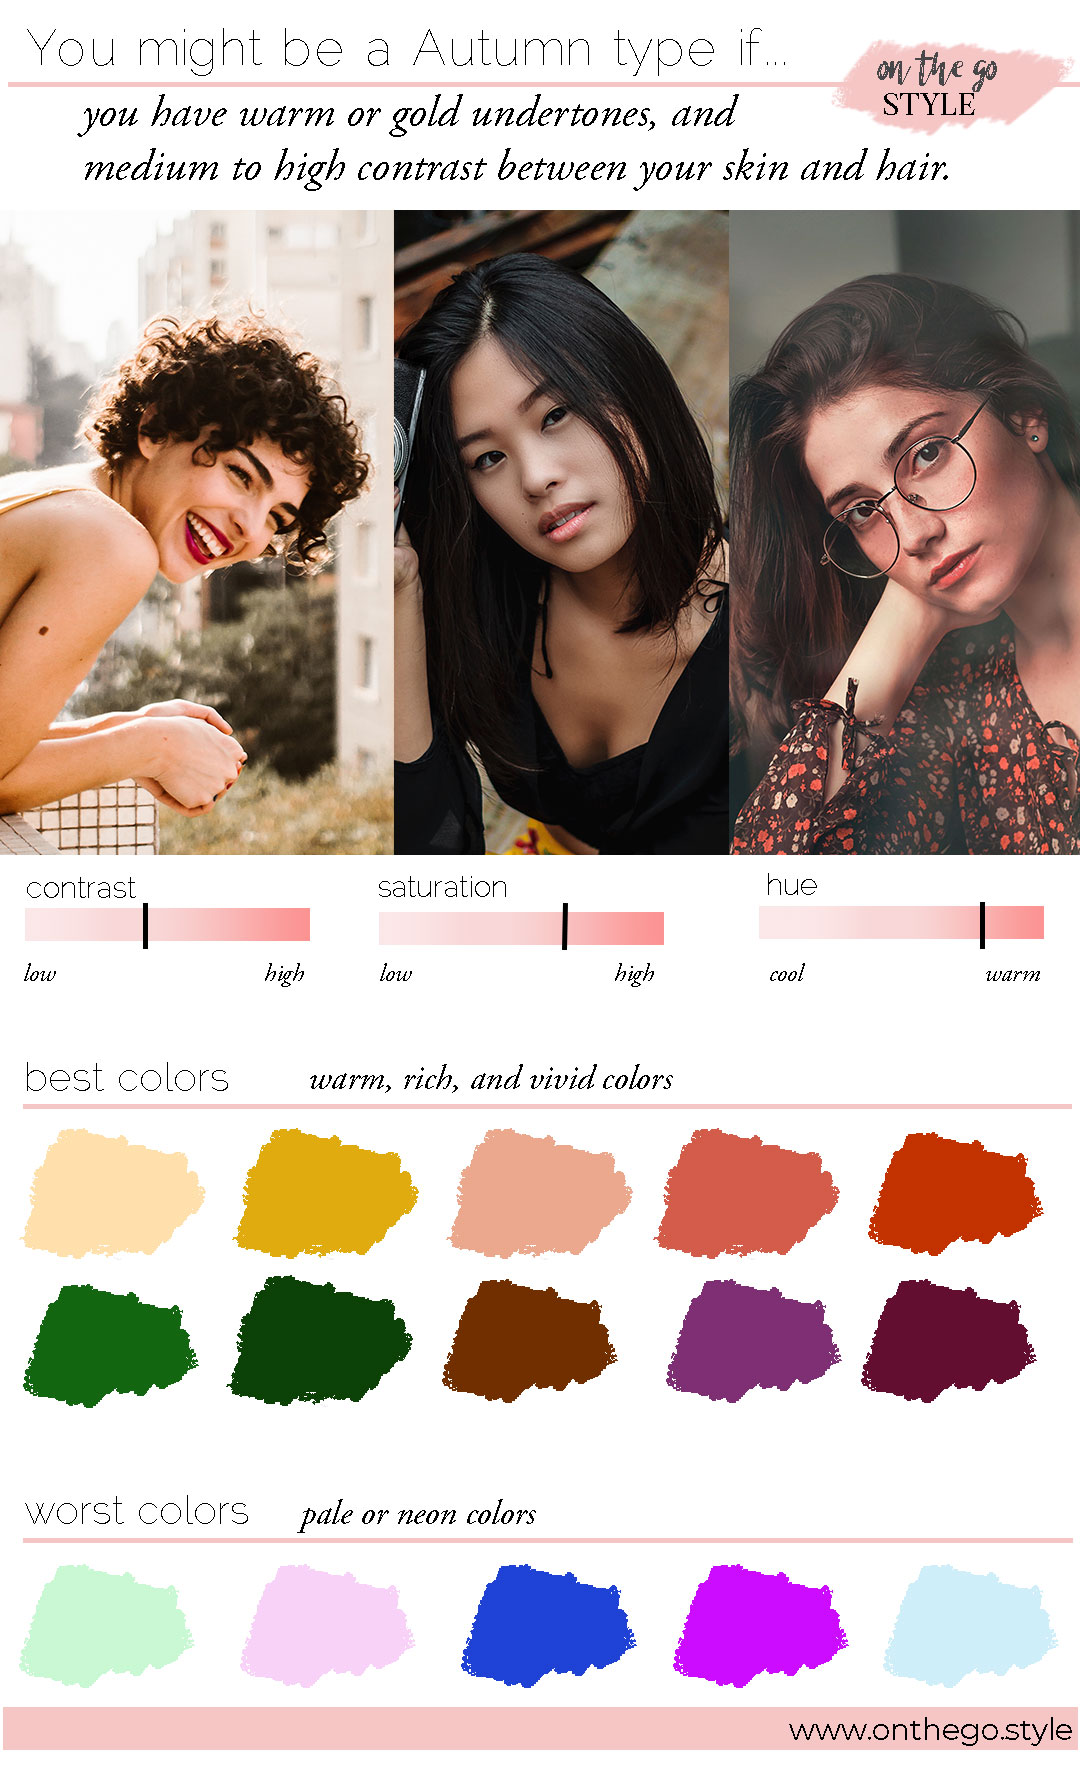 Best and Worst Colors for Autumn Types – 12 Season Color Analysis